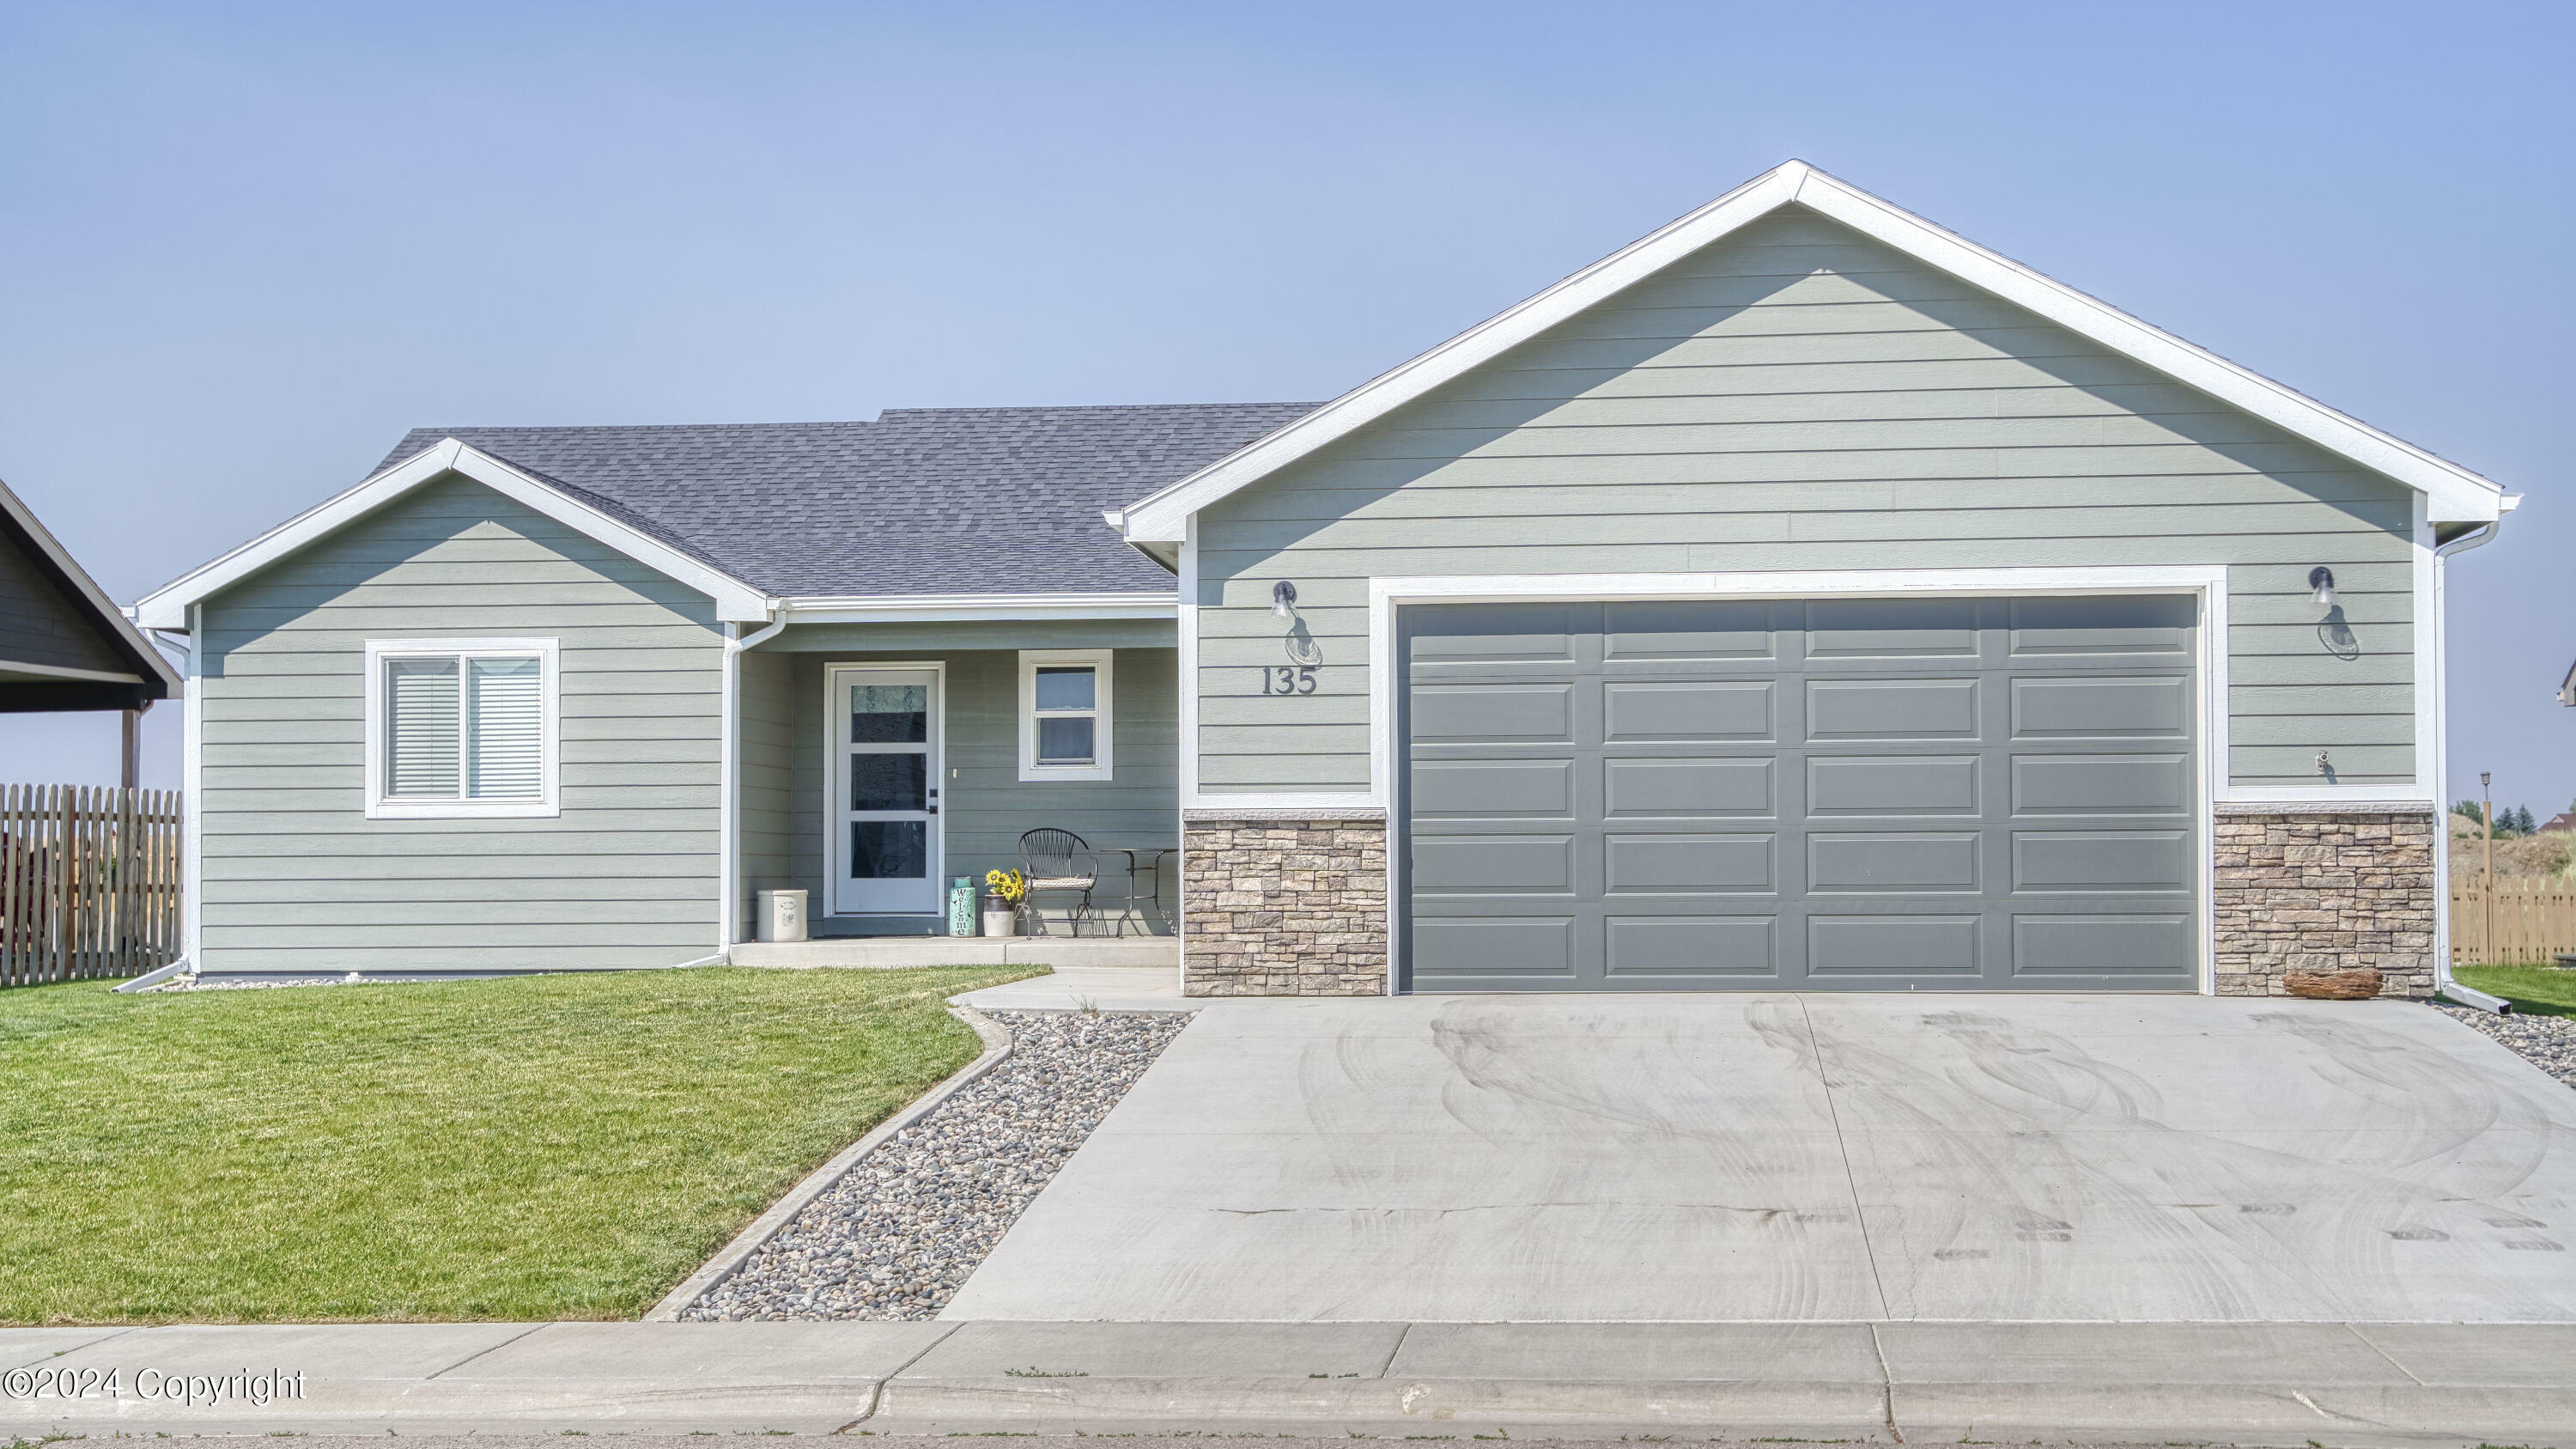 135 Tabor Ln -  Gillette WY 82718 photo